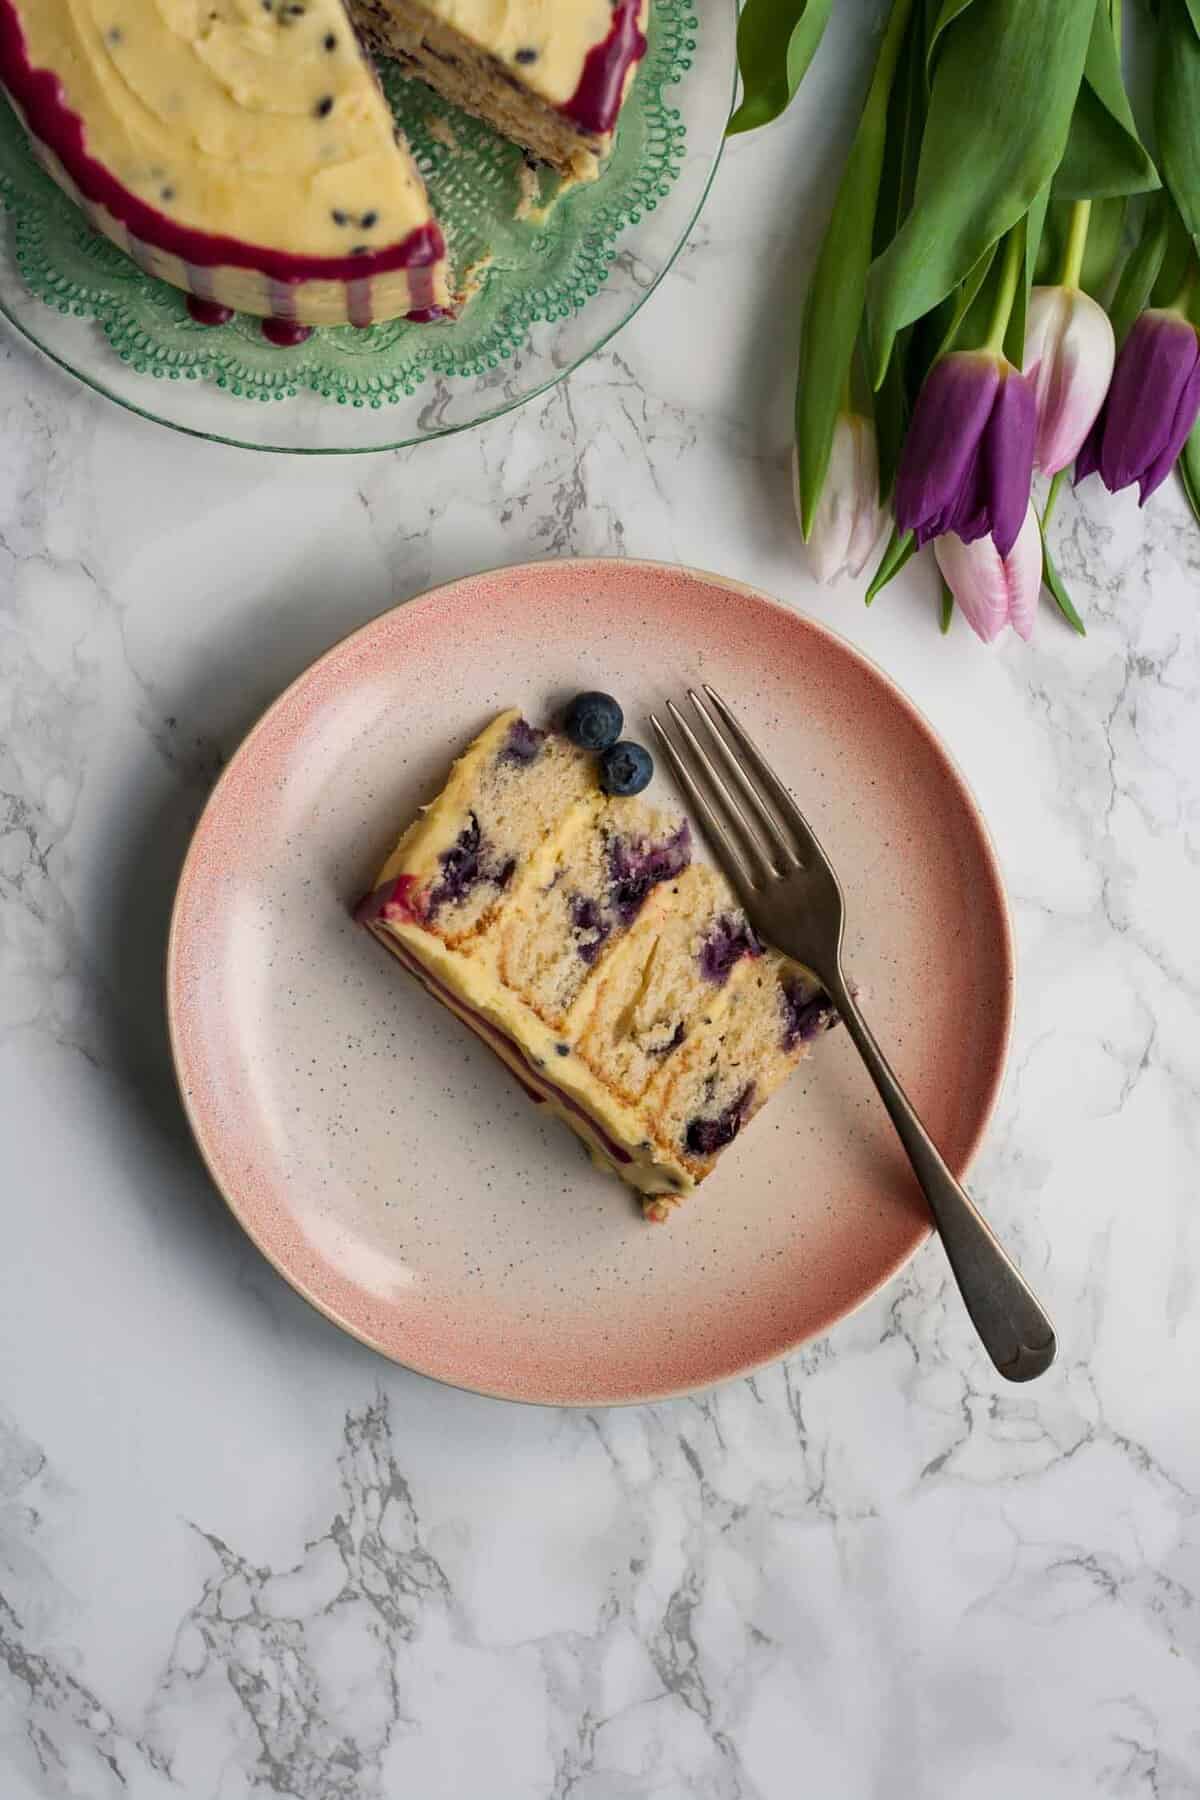 A piece of cake on a plate with a fork and some flowers nearby.